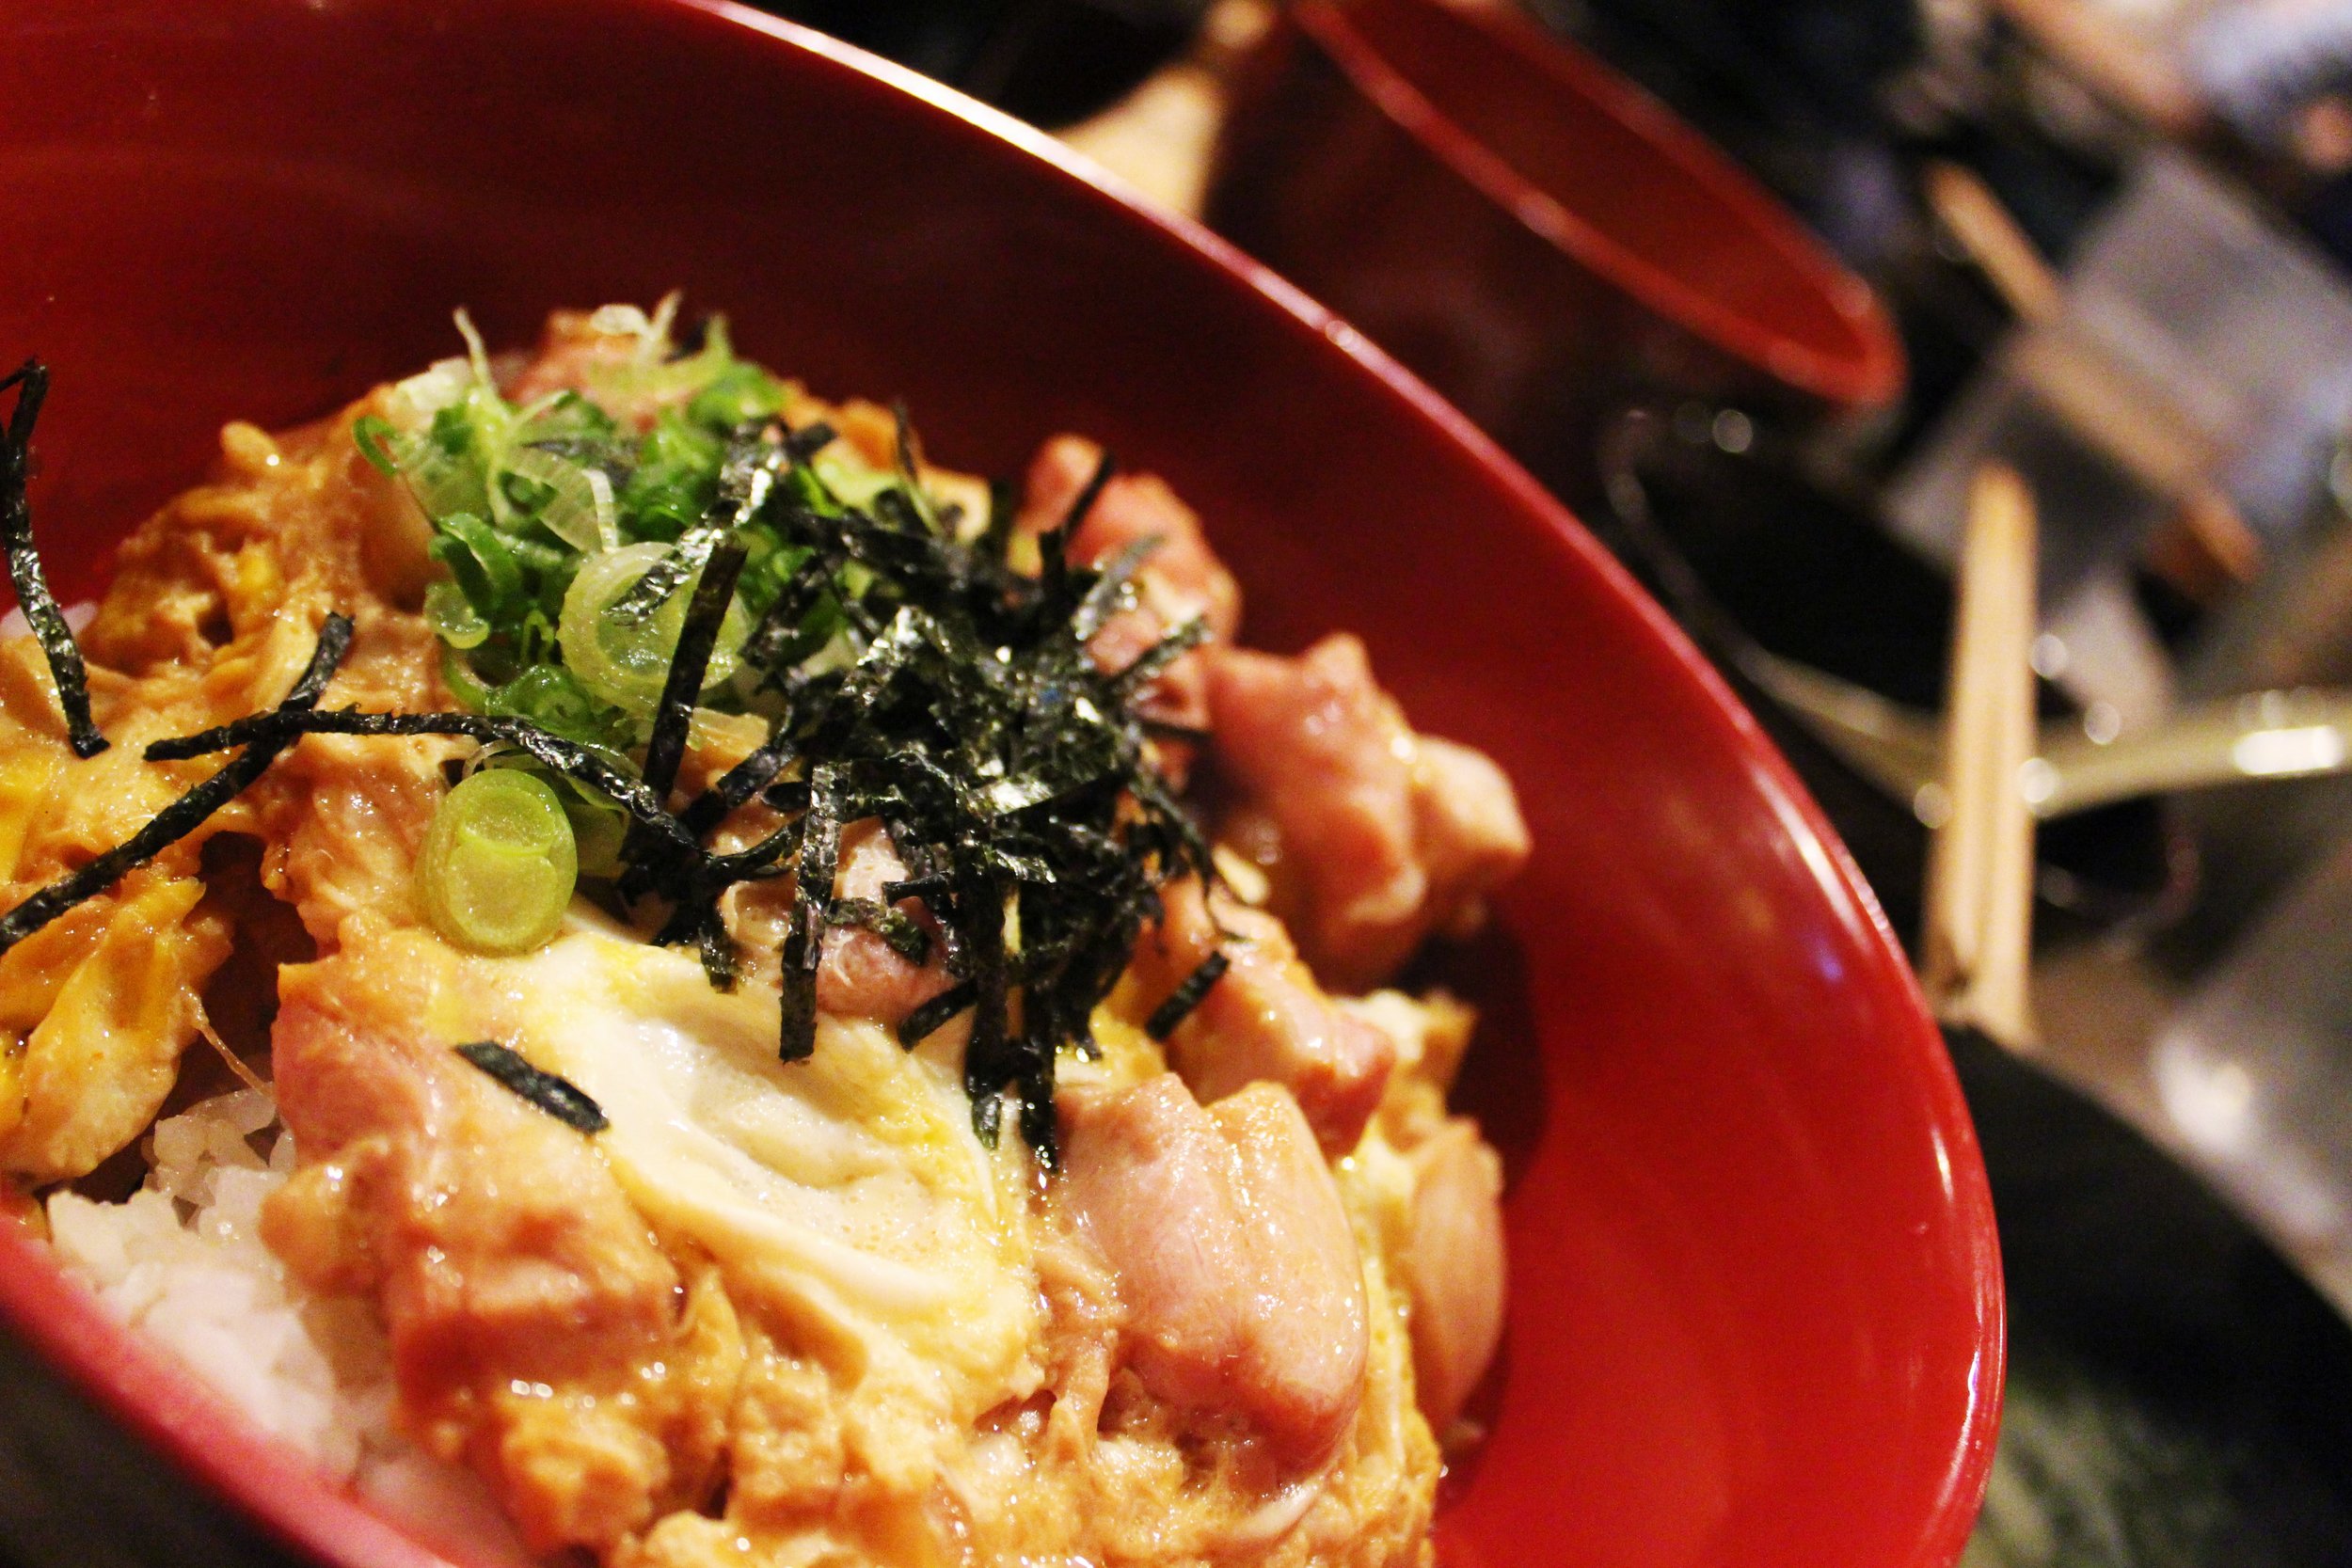 Oyako Don: Simmered Chicken and Egg over rice